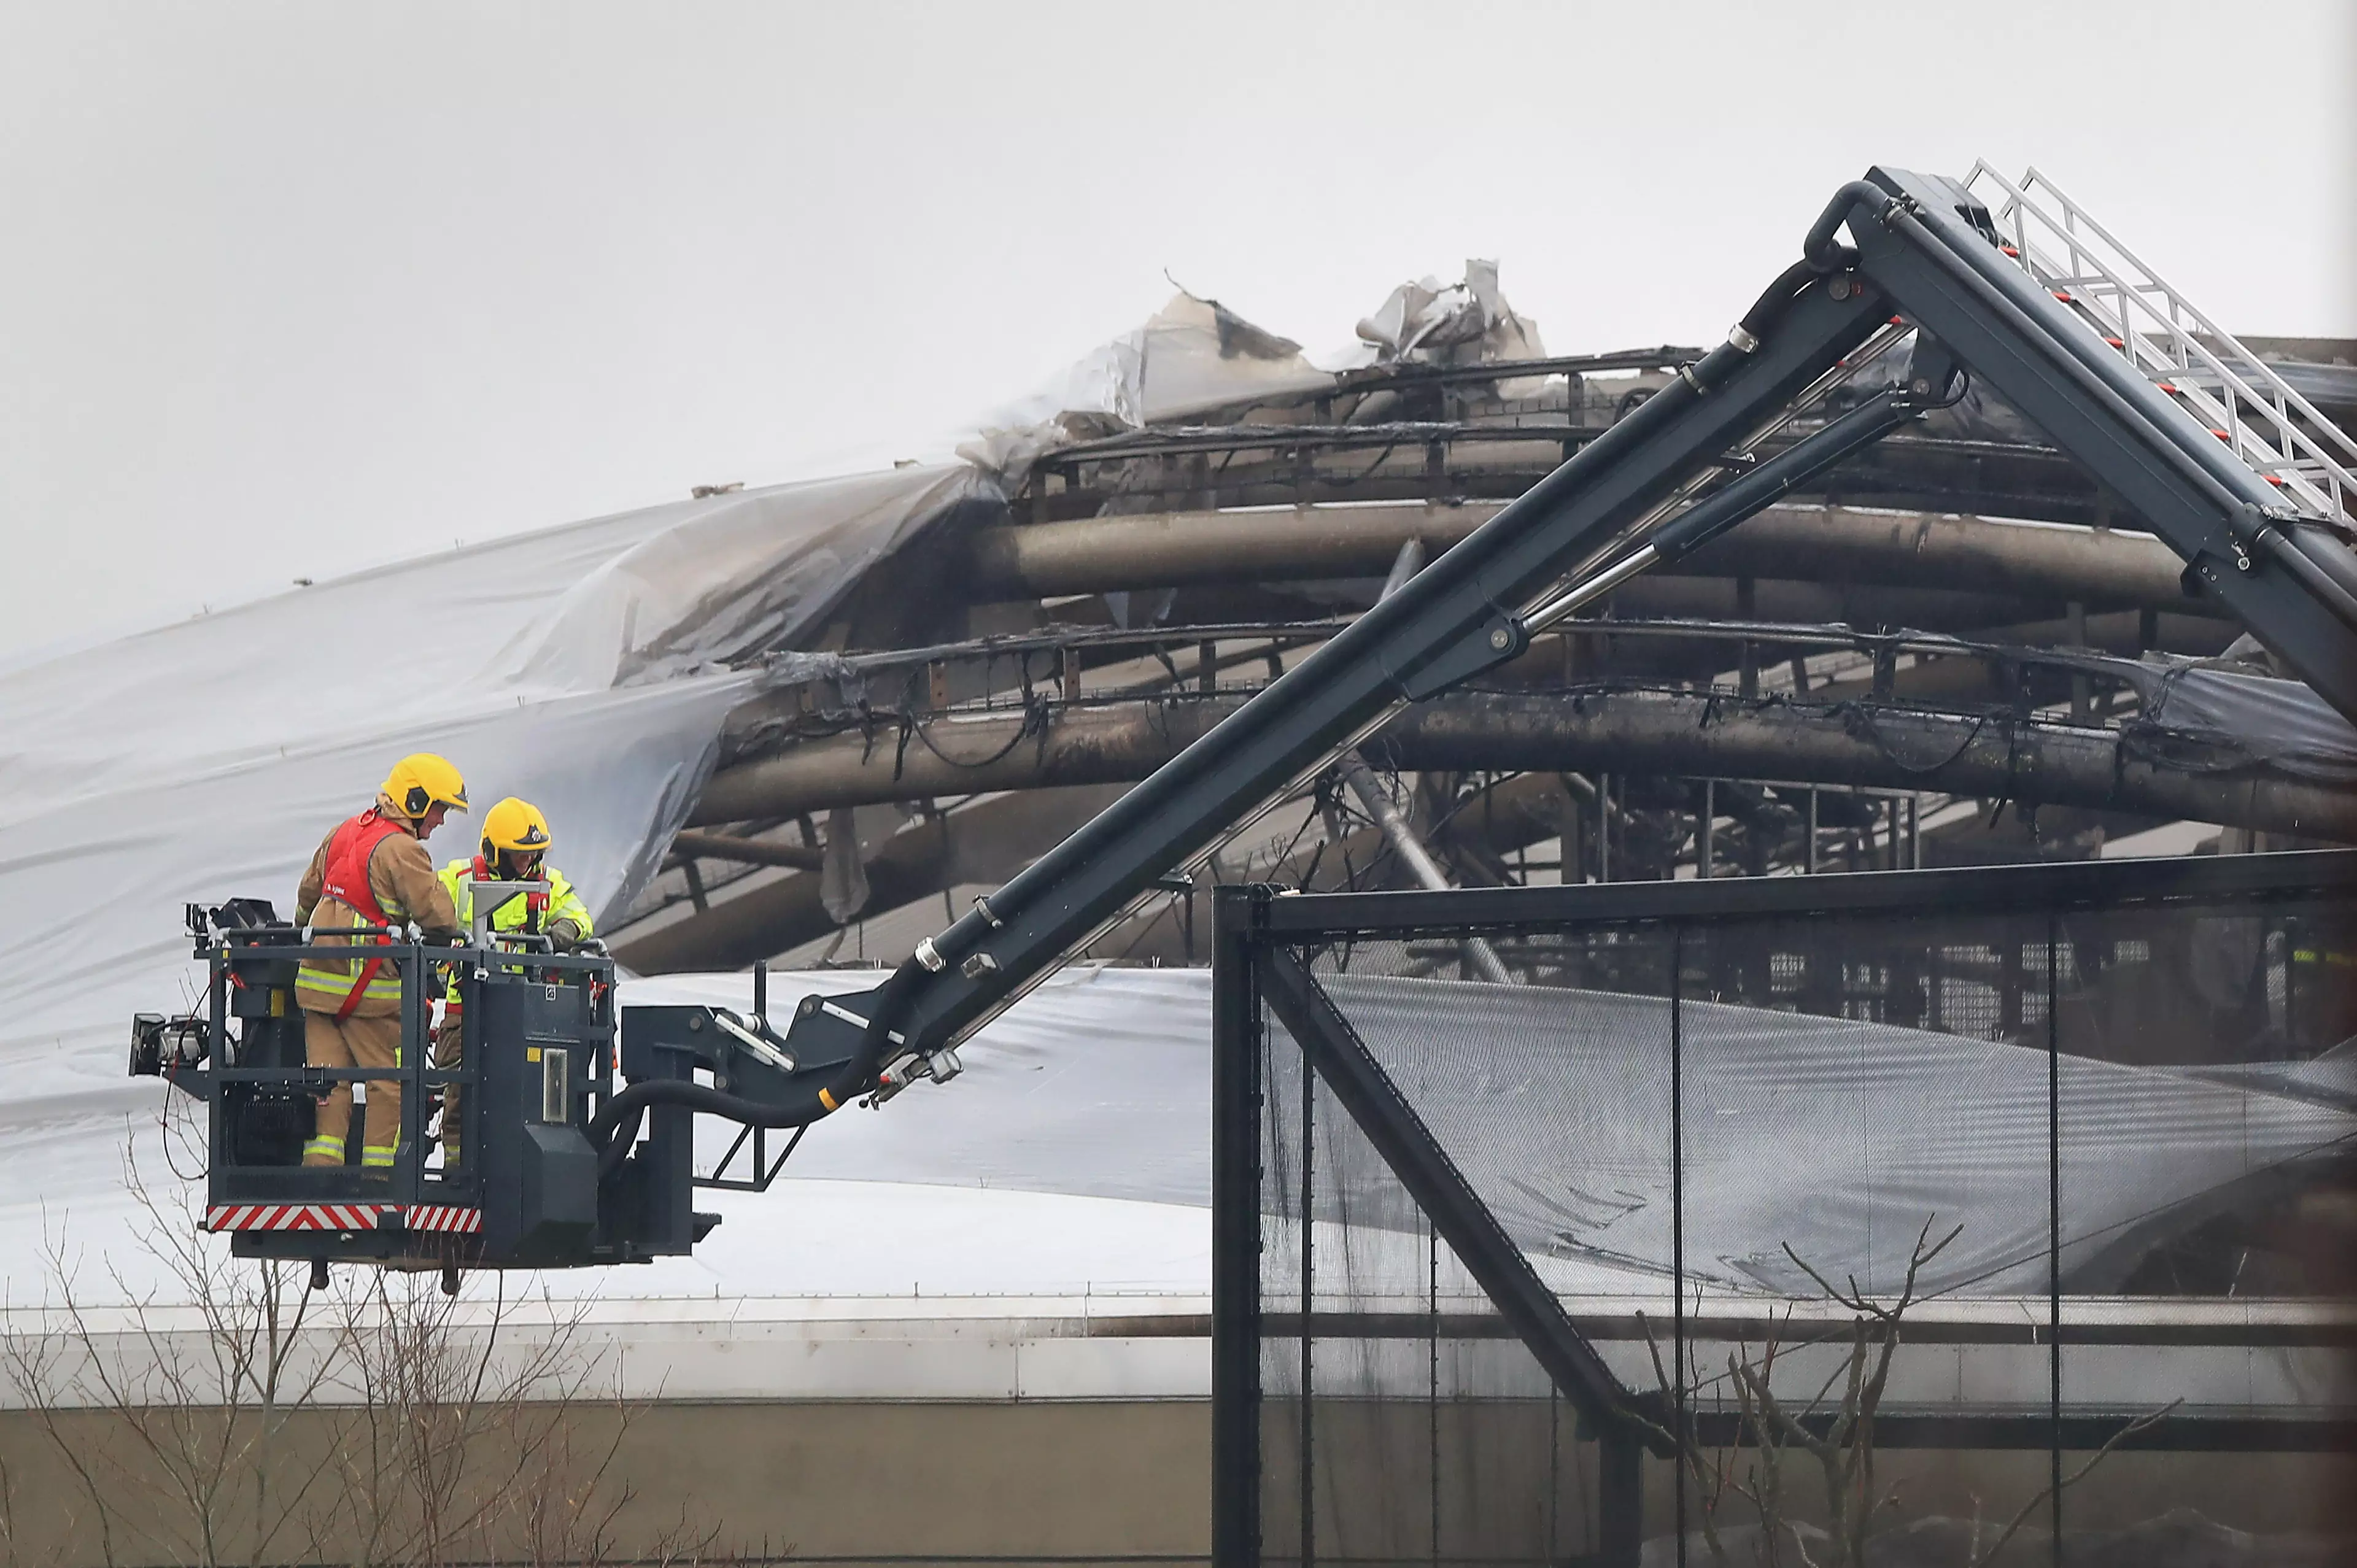 Images show the damage caused by the blaze.